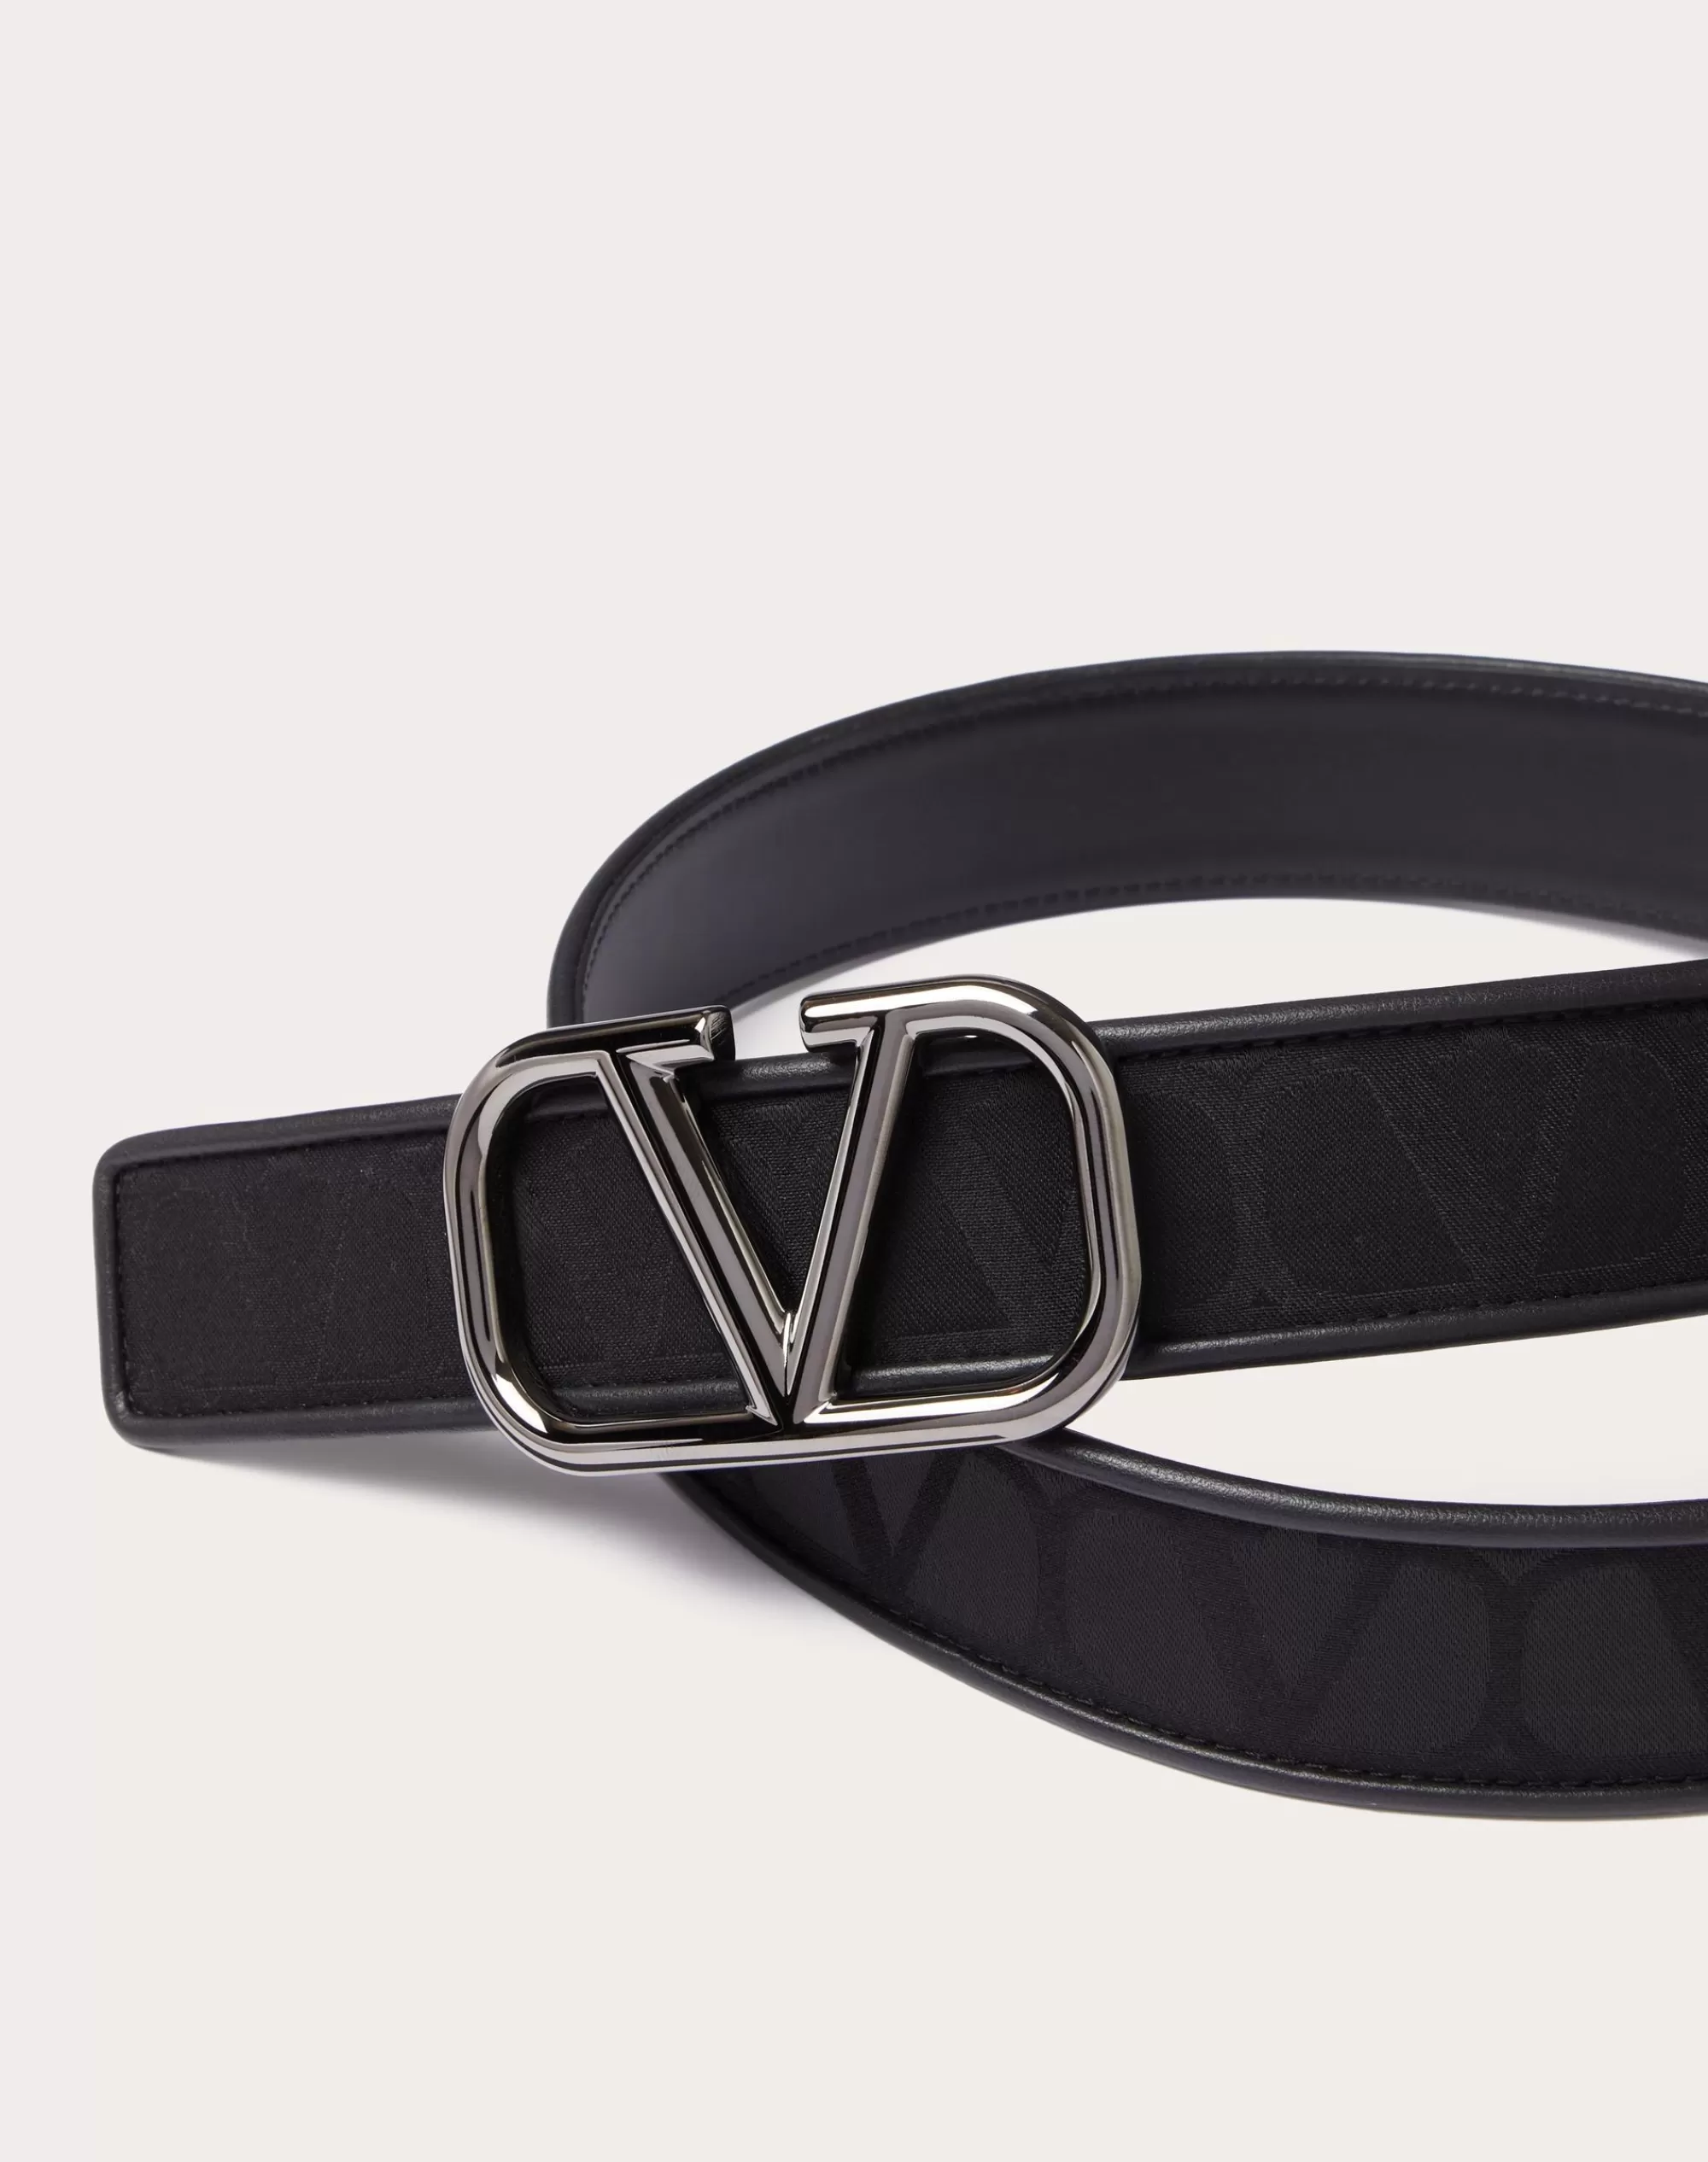 Valentino TOILE ICONOGRAPHE BELT IN TECHNICAL FABRIC WITH LEATHER DETAILS Black Best Sale